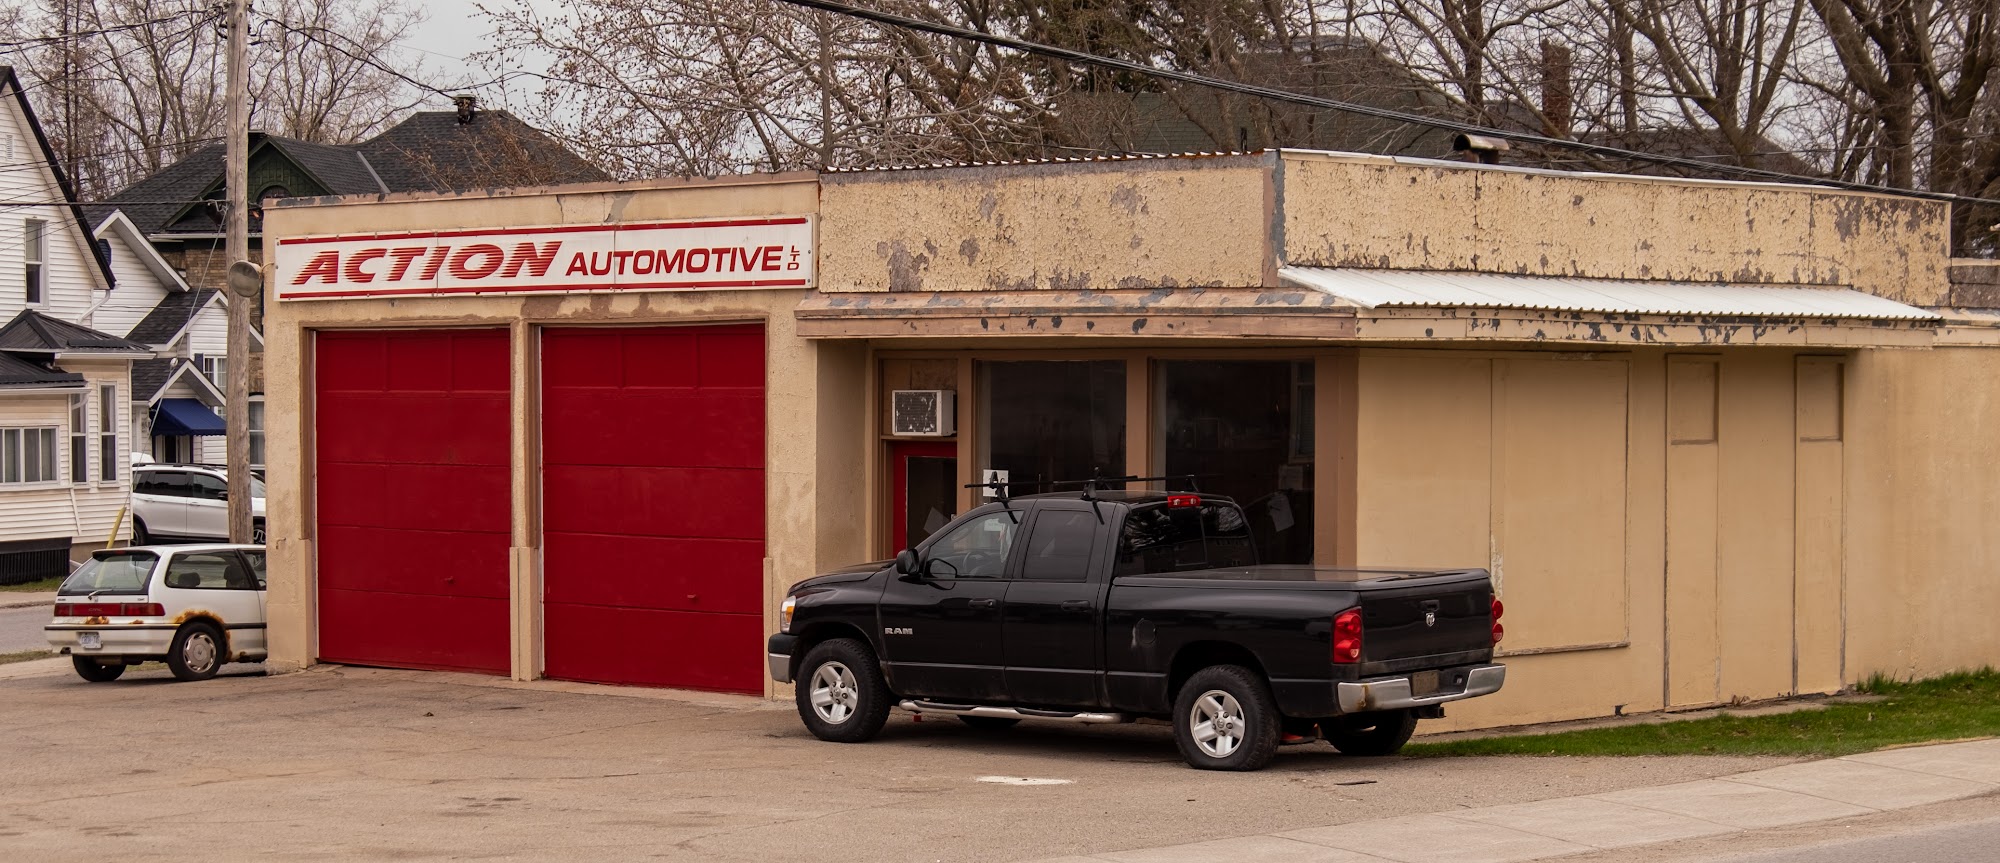 Action Automotive 136 Beckwith St N, Smiths Falls Ontario K7A 2C6